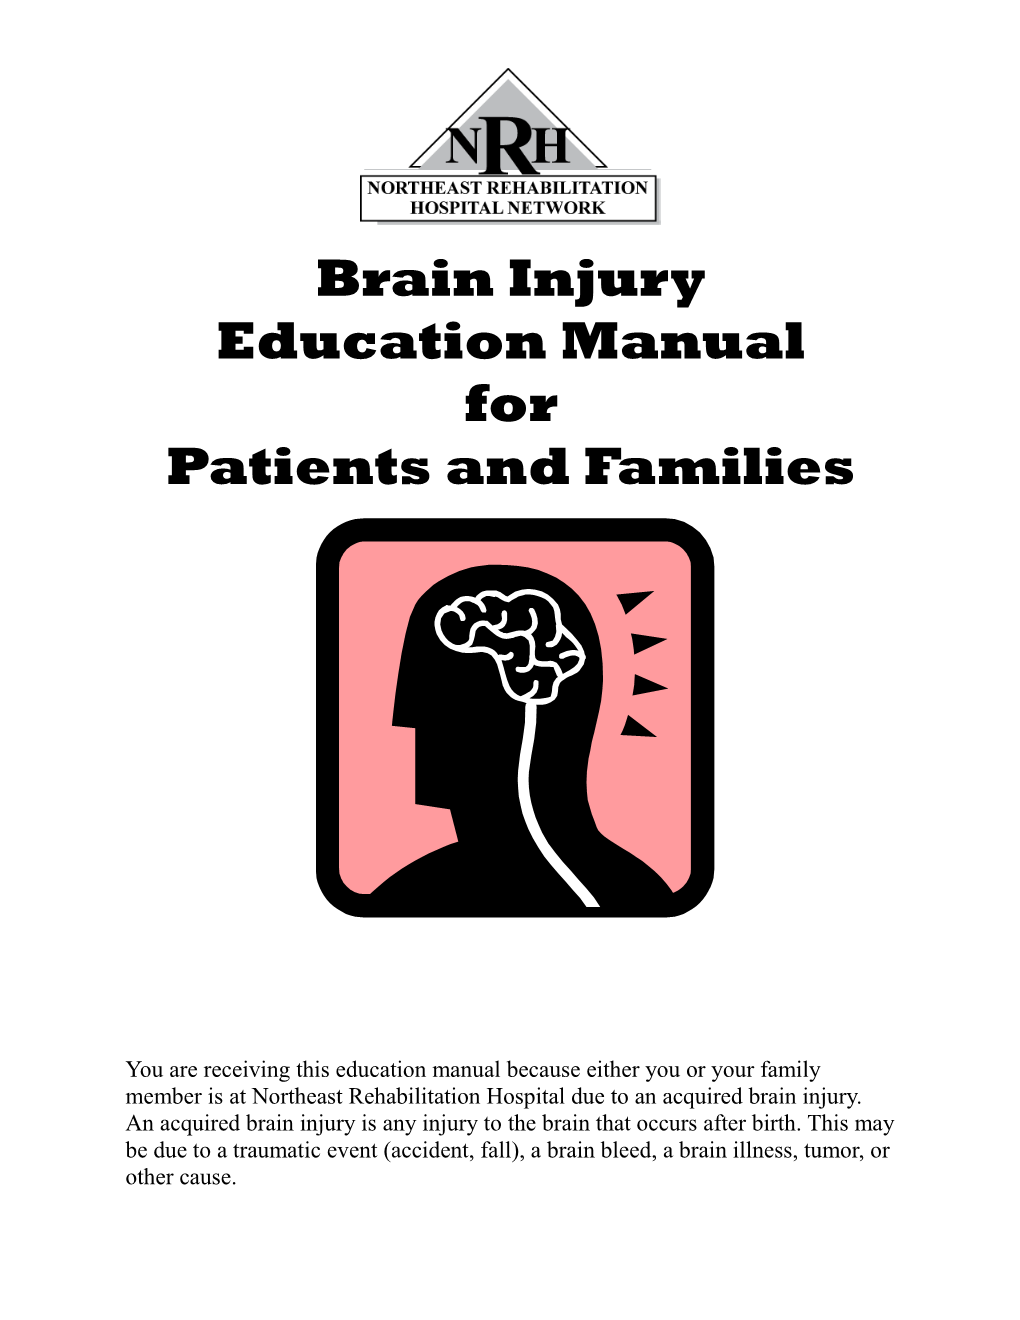 Brain Injury Education Manual for Patients and Families